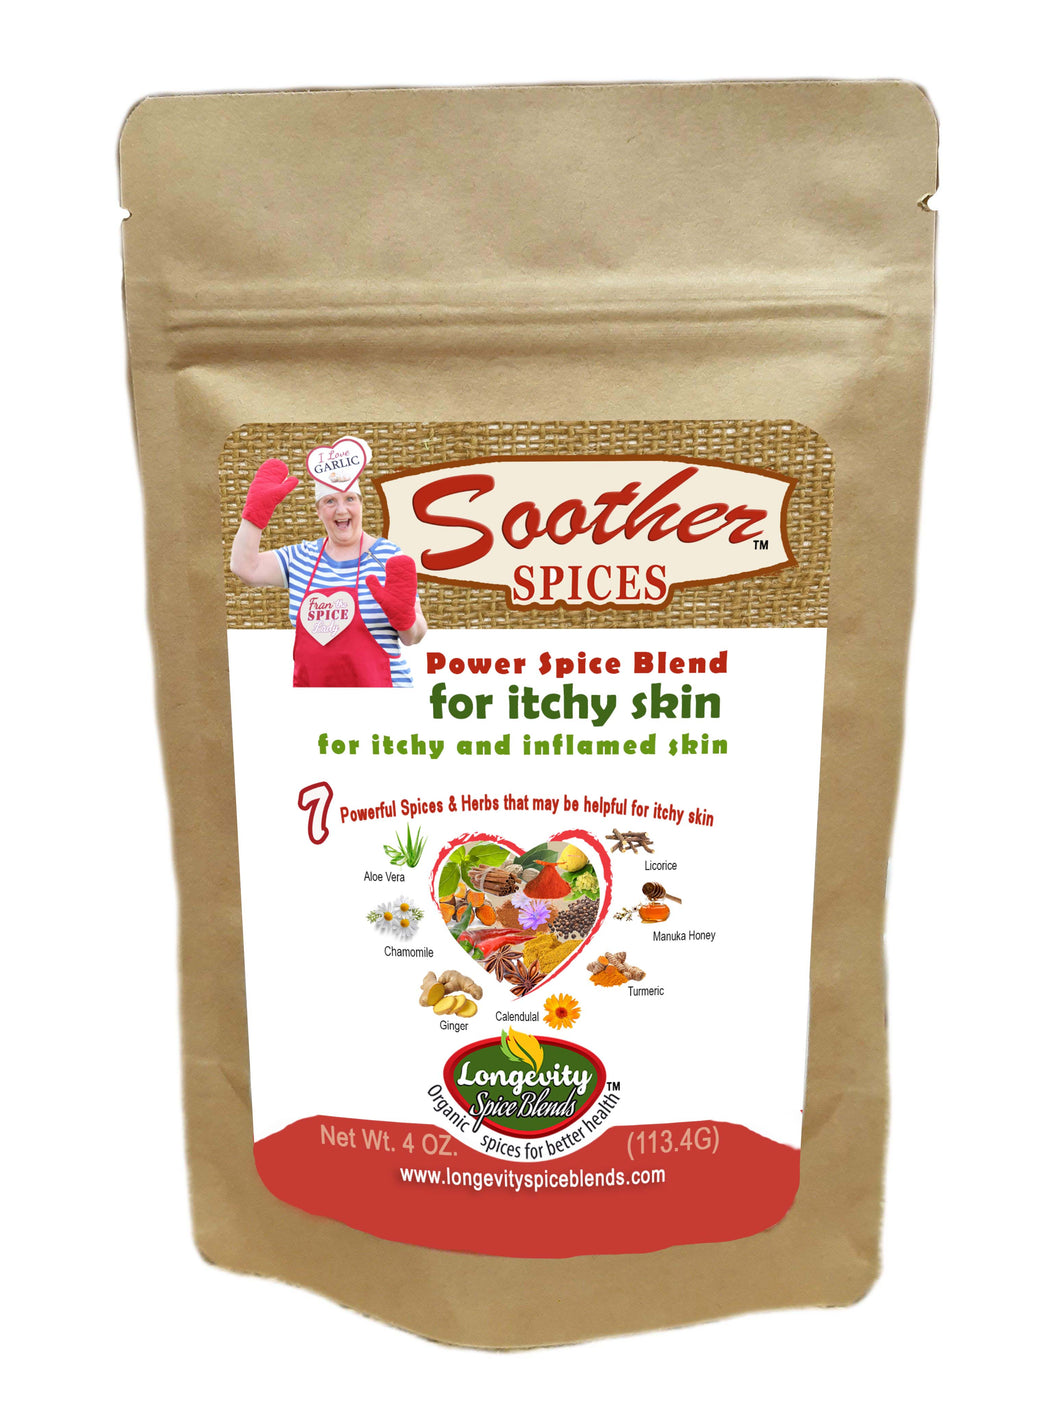 Eczema / Soother Spices - for Itchy Skin such as Eczema